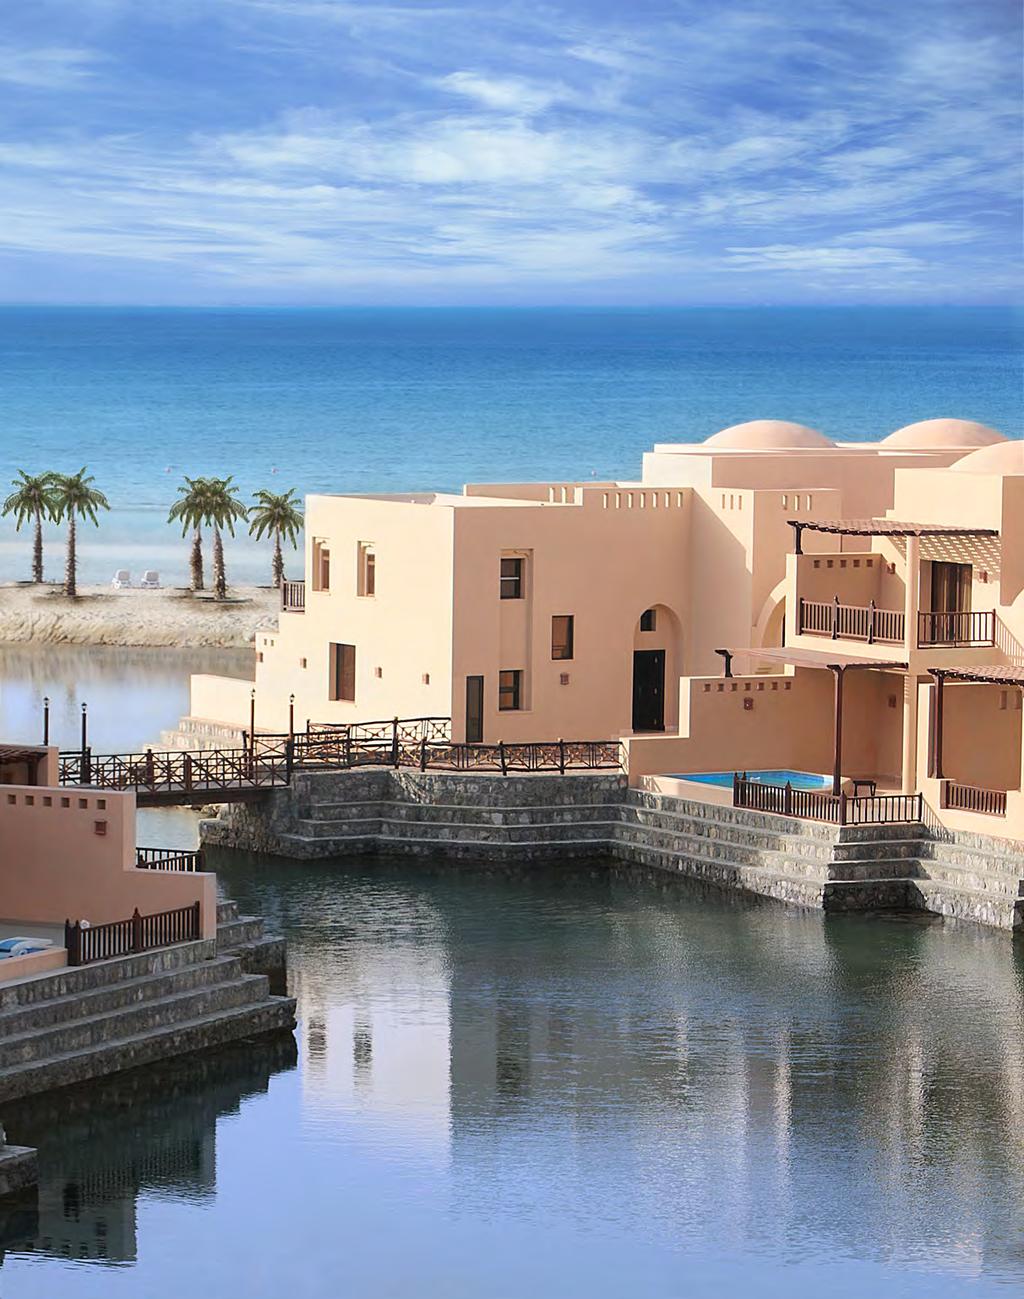 Cove Rotana RAS AL KHAIMAH An idyllic property that looks a lot like a dreamy, quiet village, Cove Rotana takes pride in the five-star paradise it has designed for travellers looking for a serene